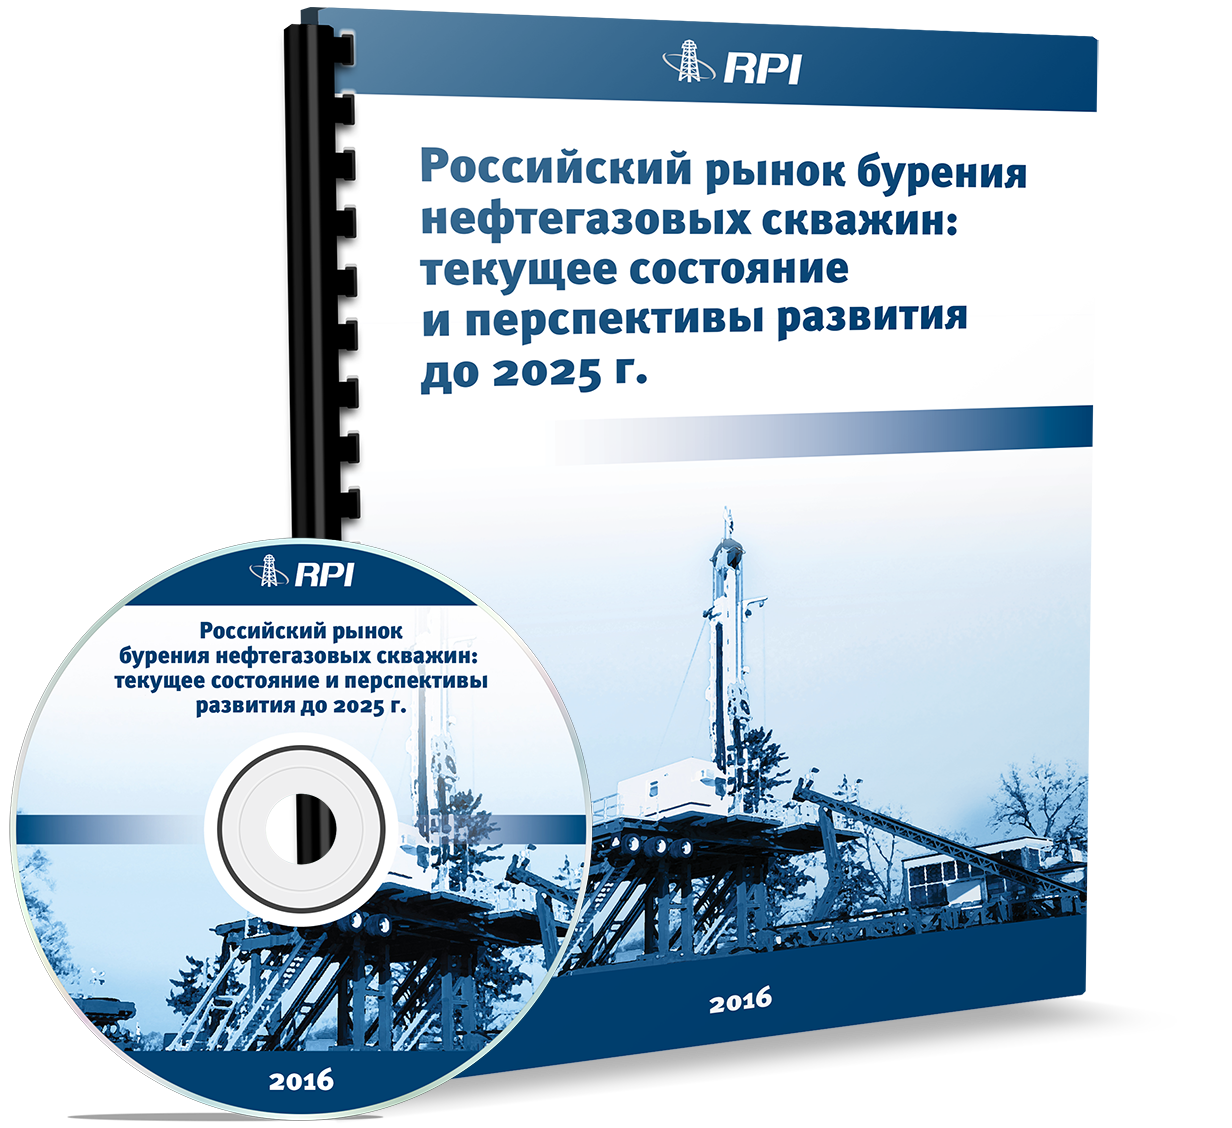 Russian Drilling Market: Current State and Development Prospects until 2025